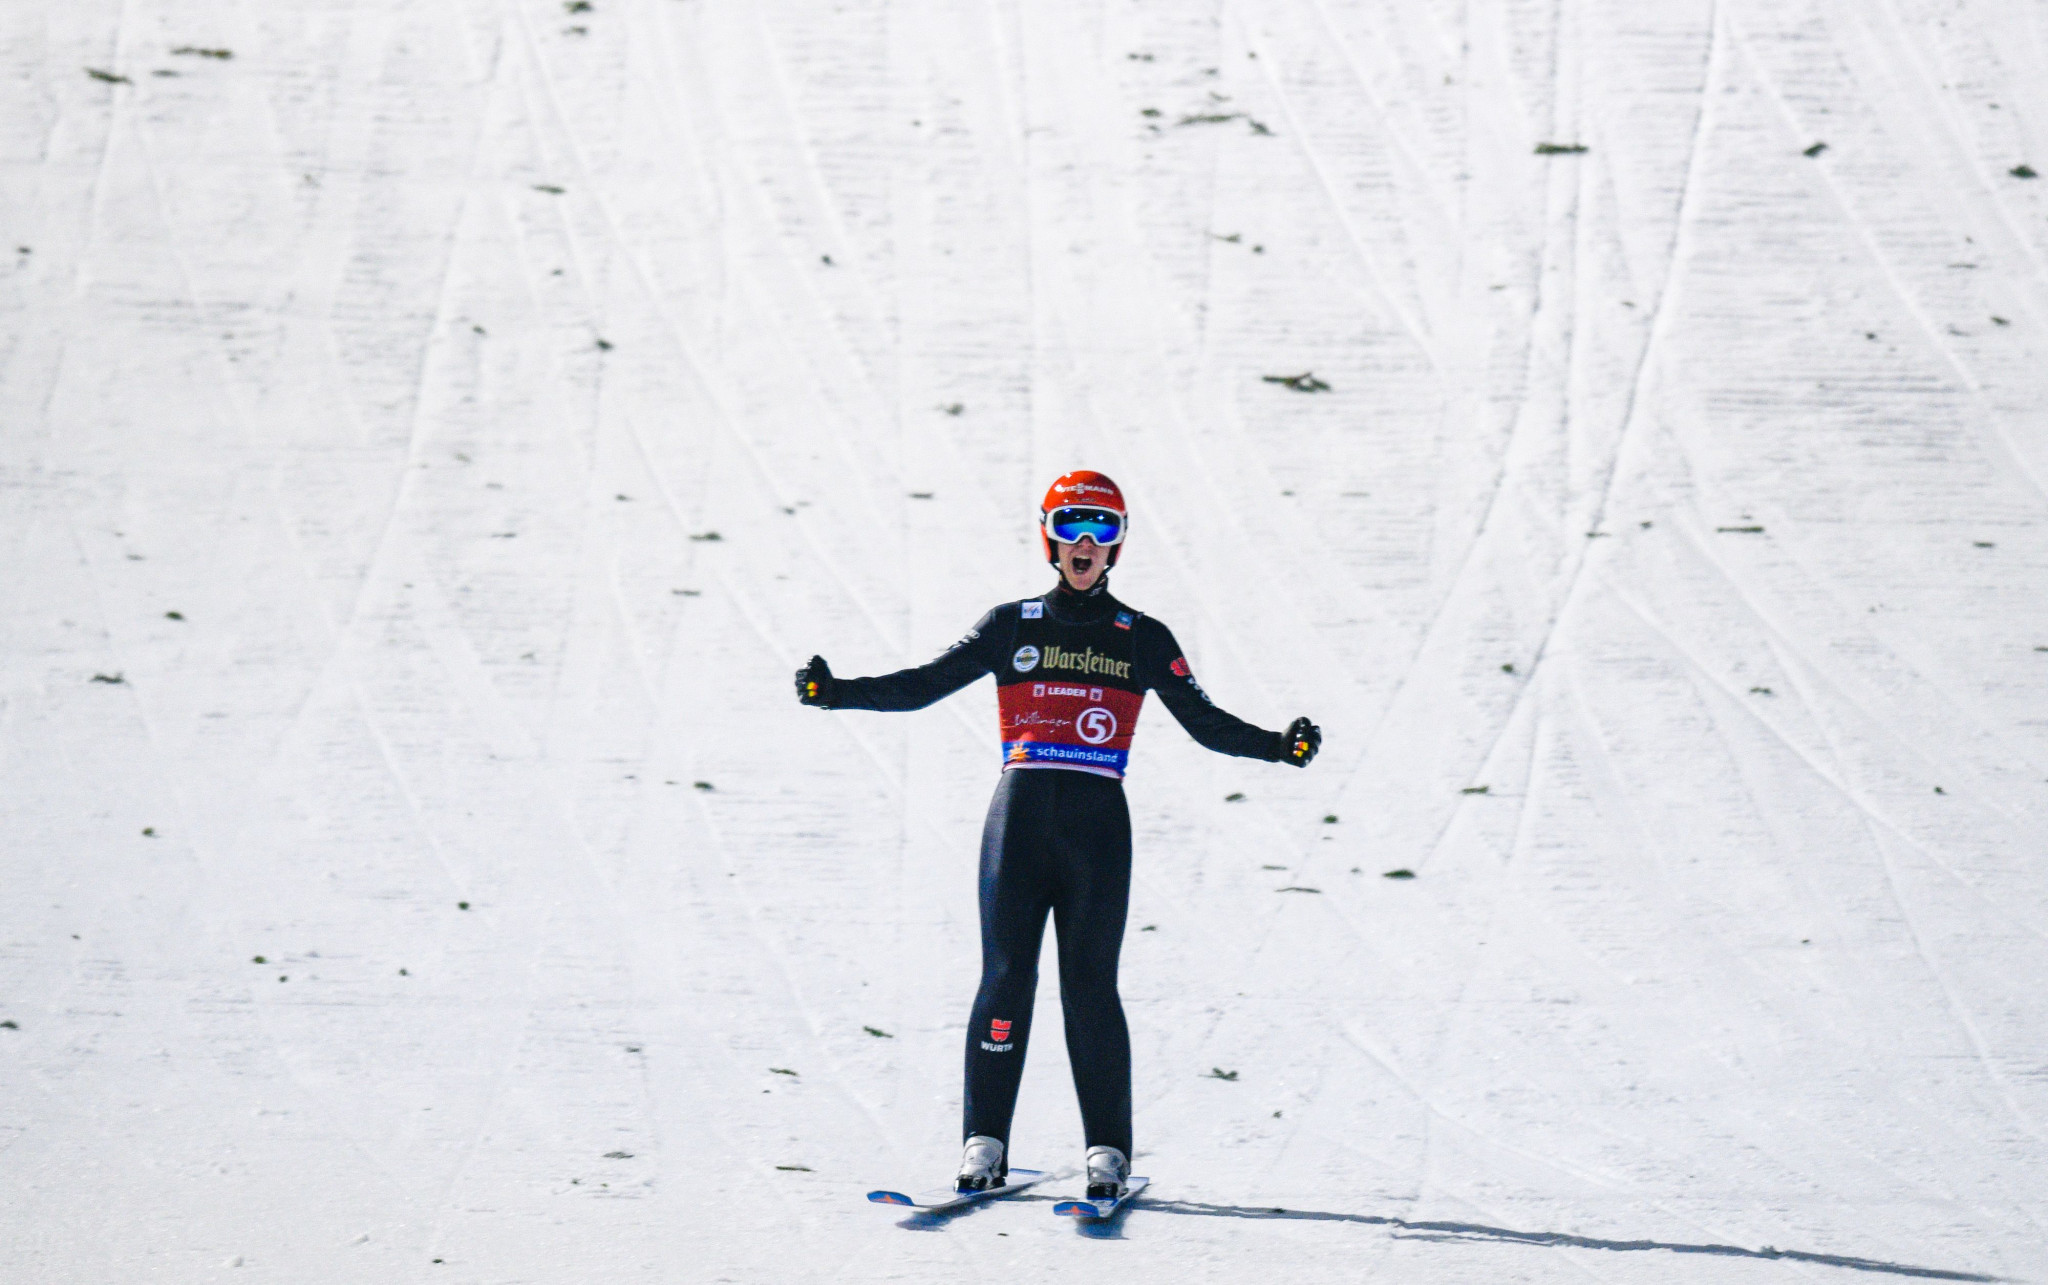 Leyhe records first FIS Ski Jumping World Cup win in Willingen